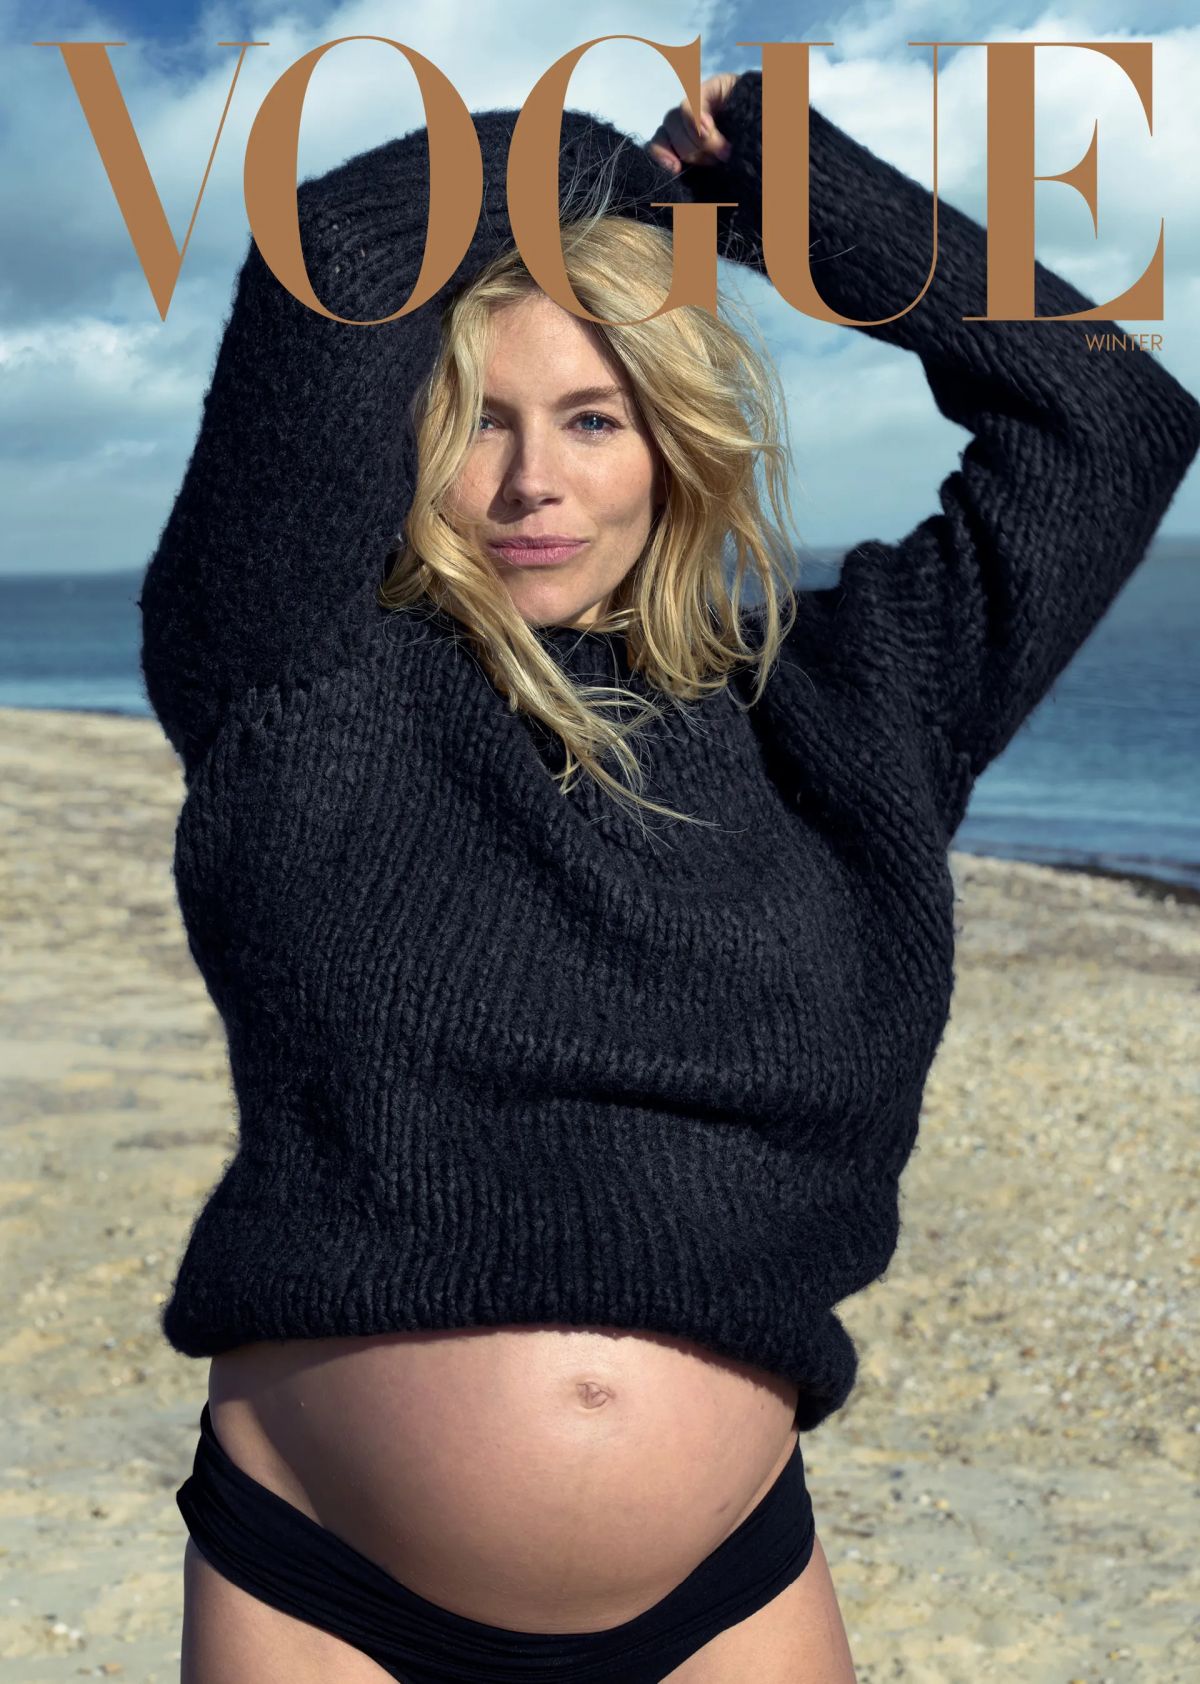 Pregnant Sienna Miller Maternity Glow in Vogue